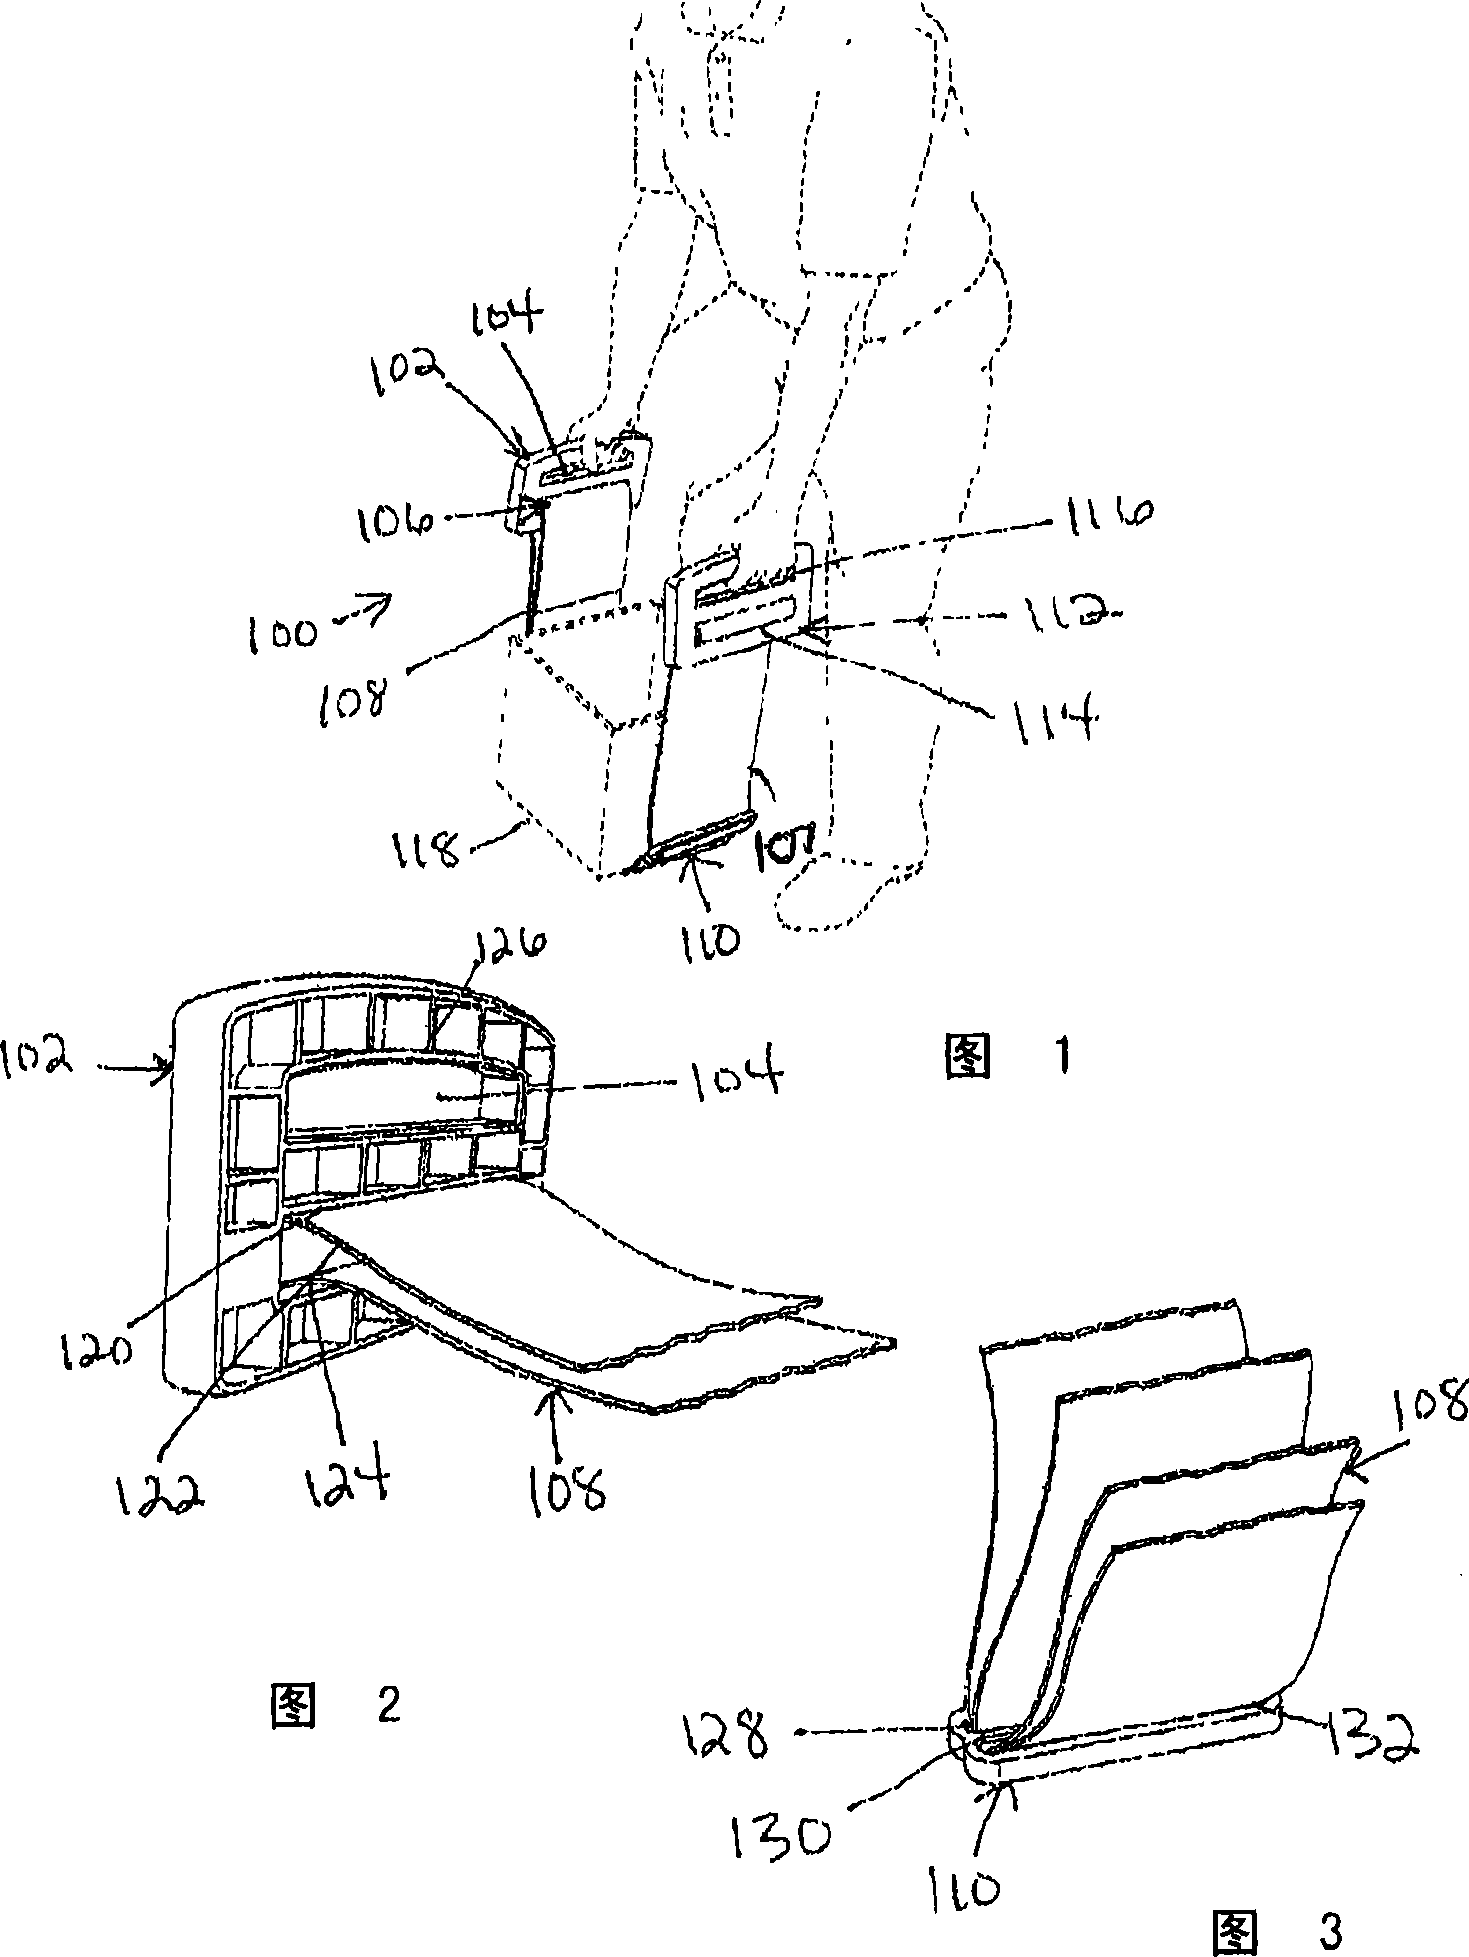 Adjustable strap with handles for lifting objects safely